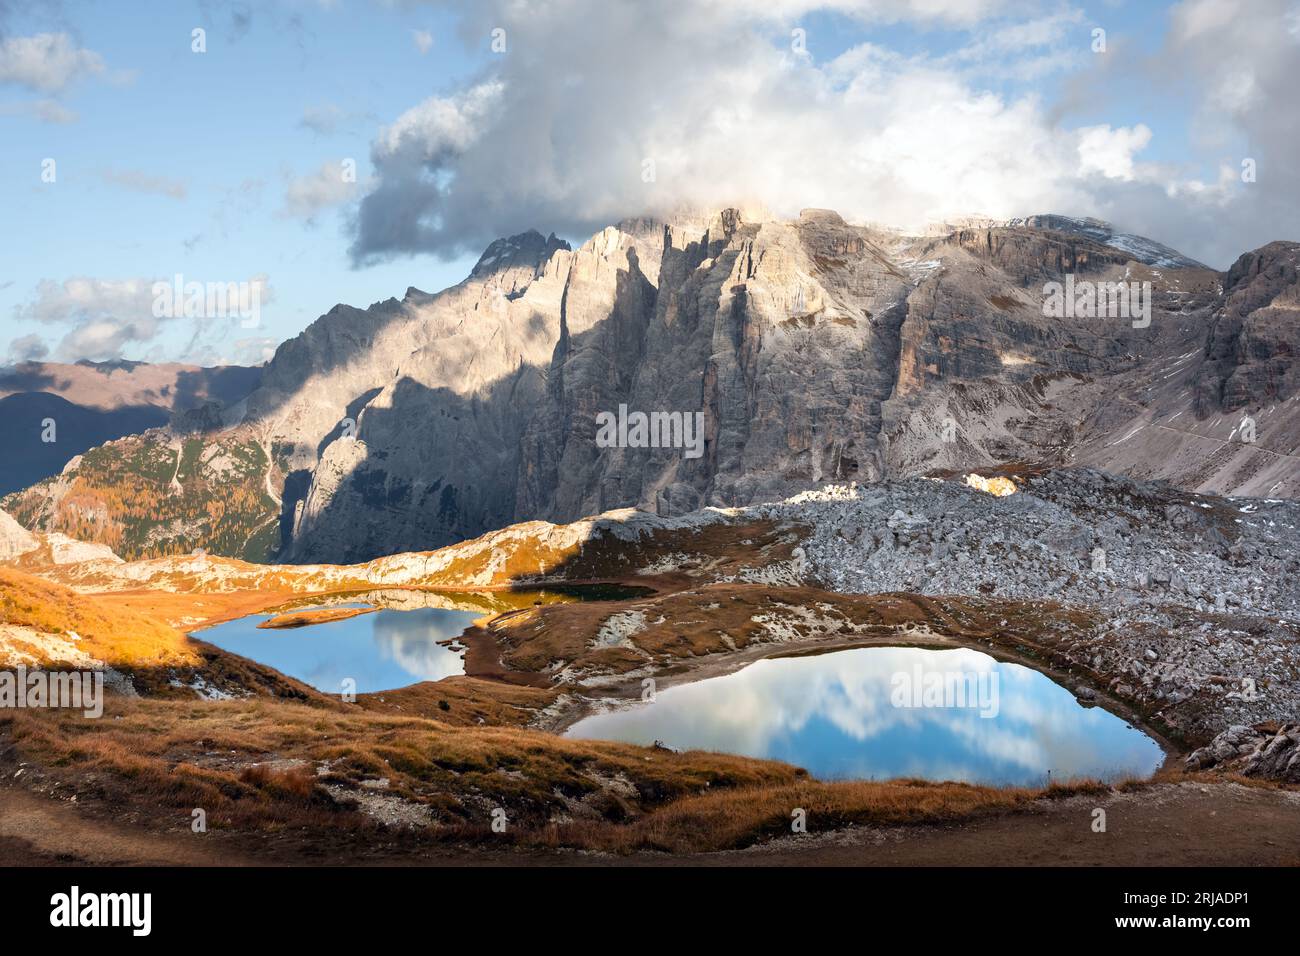 Clear turquoise water of alpine lakes Piani in the Tre Cime Di Laveredo National Park, Dolomites, Italy Stock Photo